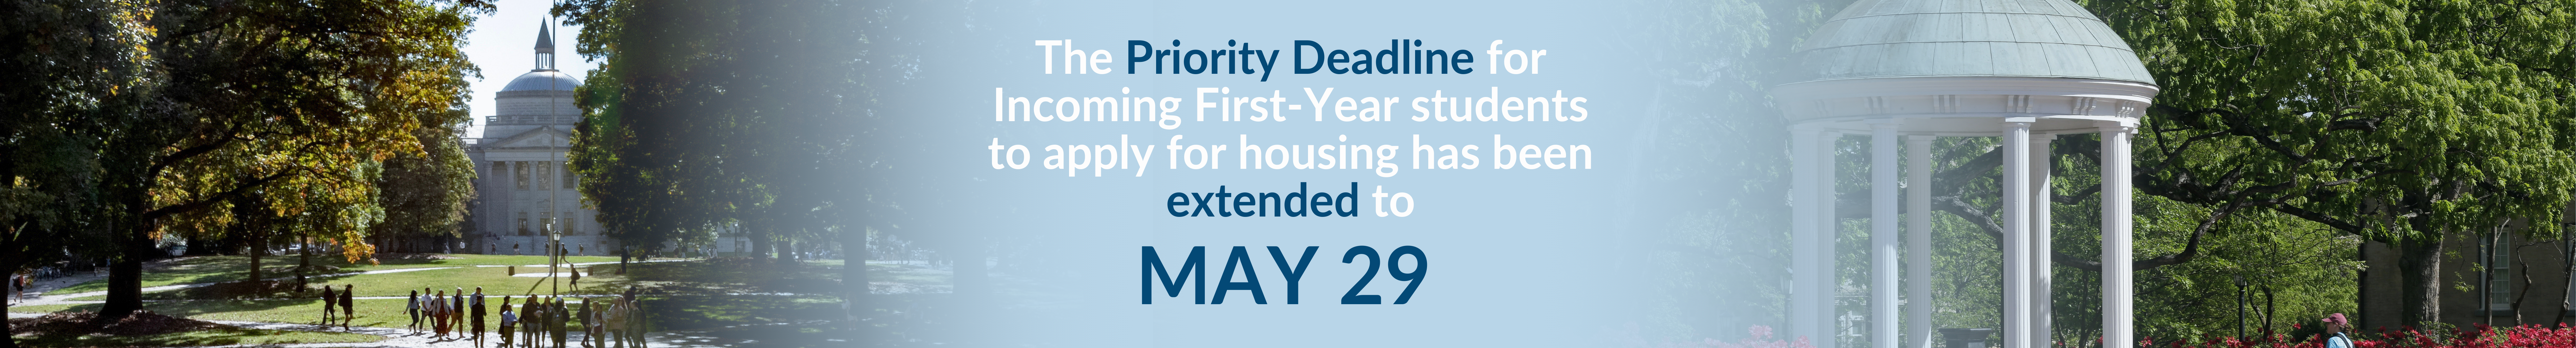 The Priority Deadline for Incoming First-Years to apply for housing has been extended to May 29